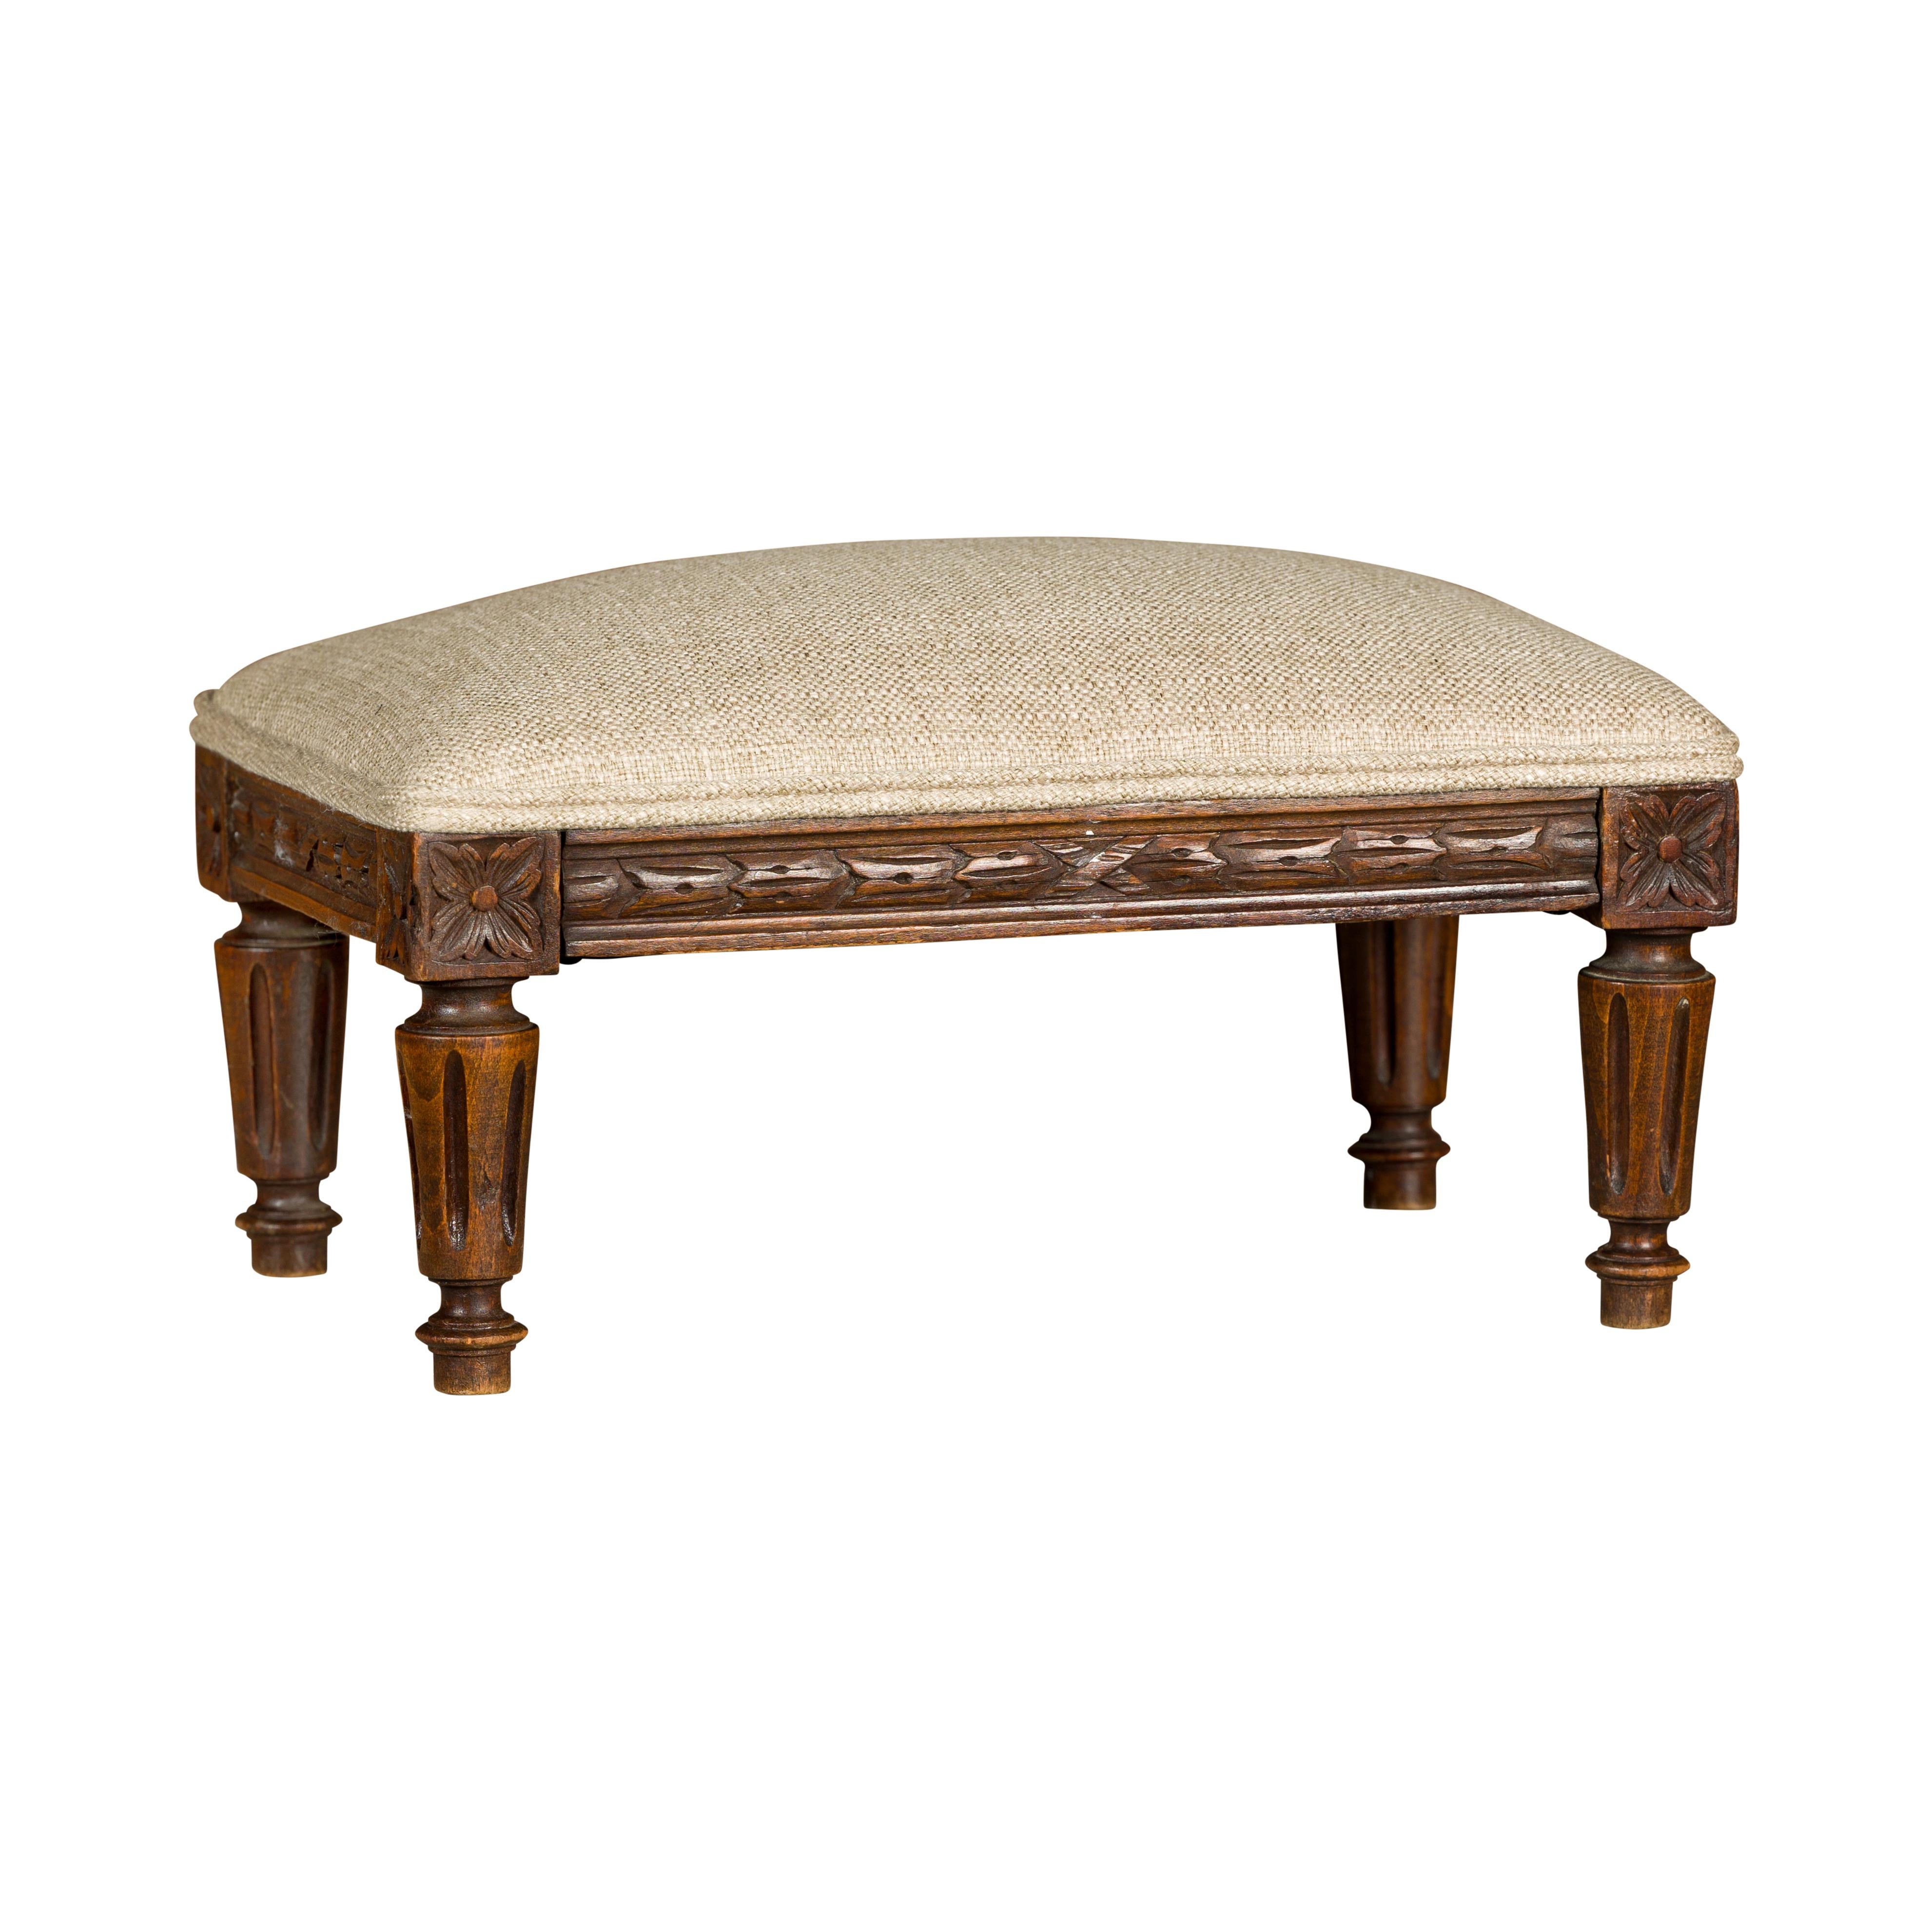 French Louis XVI Style 19th Century Footstool with Carved Décor and Fluted Legs For Sale 9